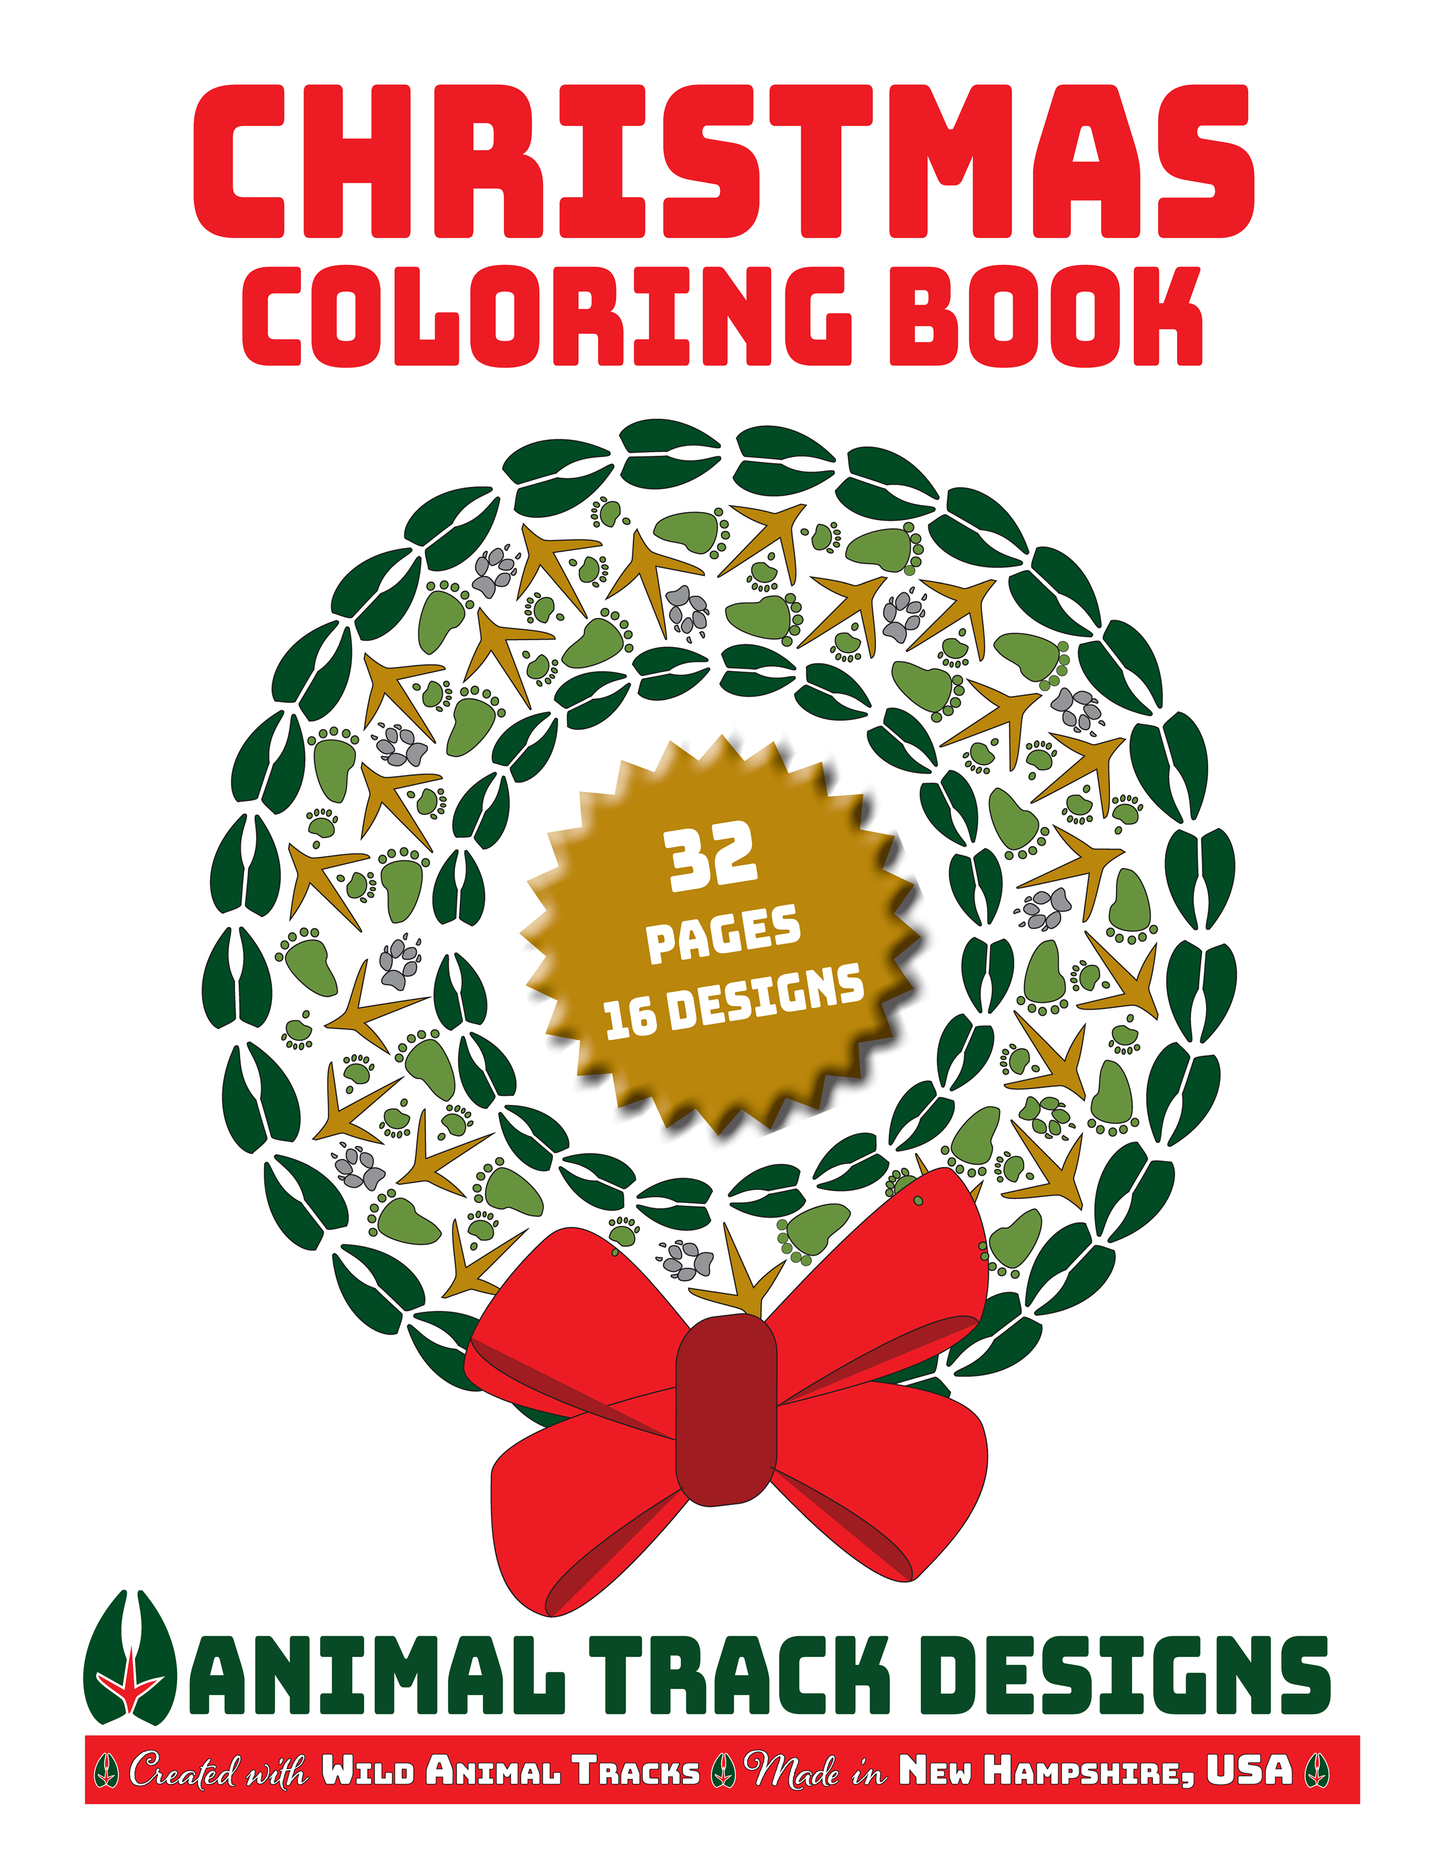 Christmas Coloring Book - Animal Track Designs Animal Track Designs